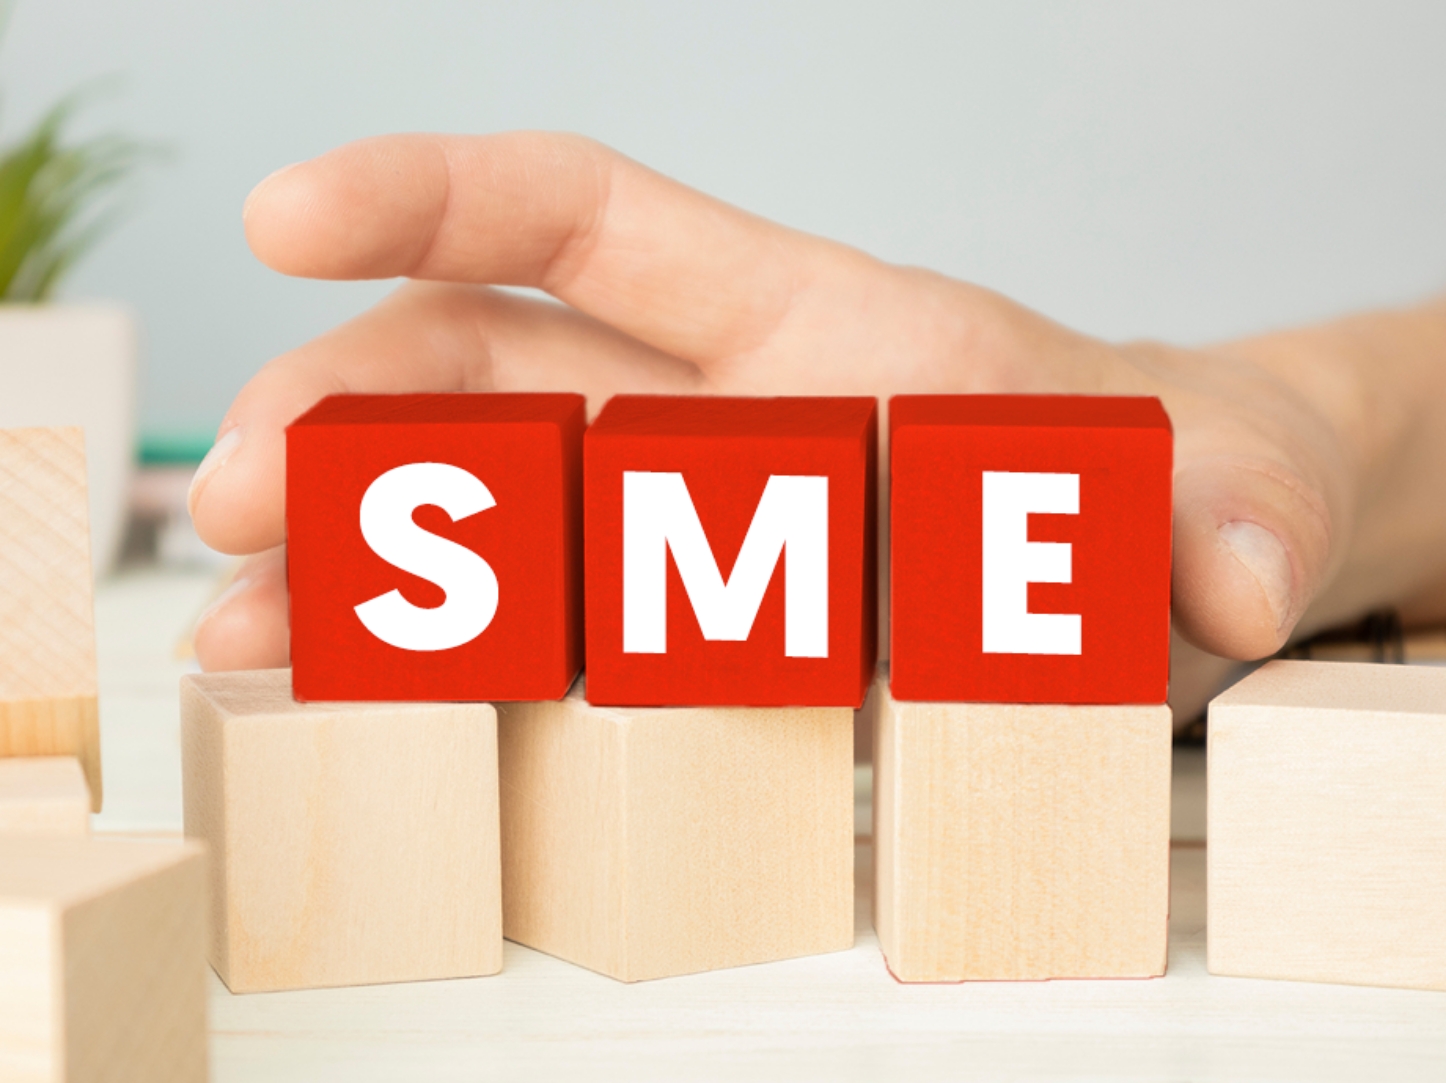 Business Bank Account 101: Quick Guide for SMEs